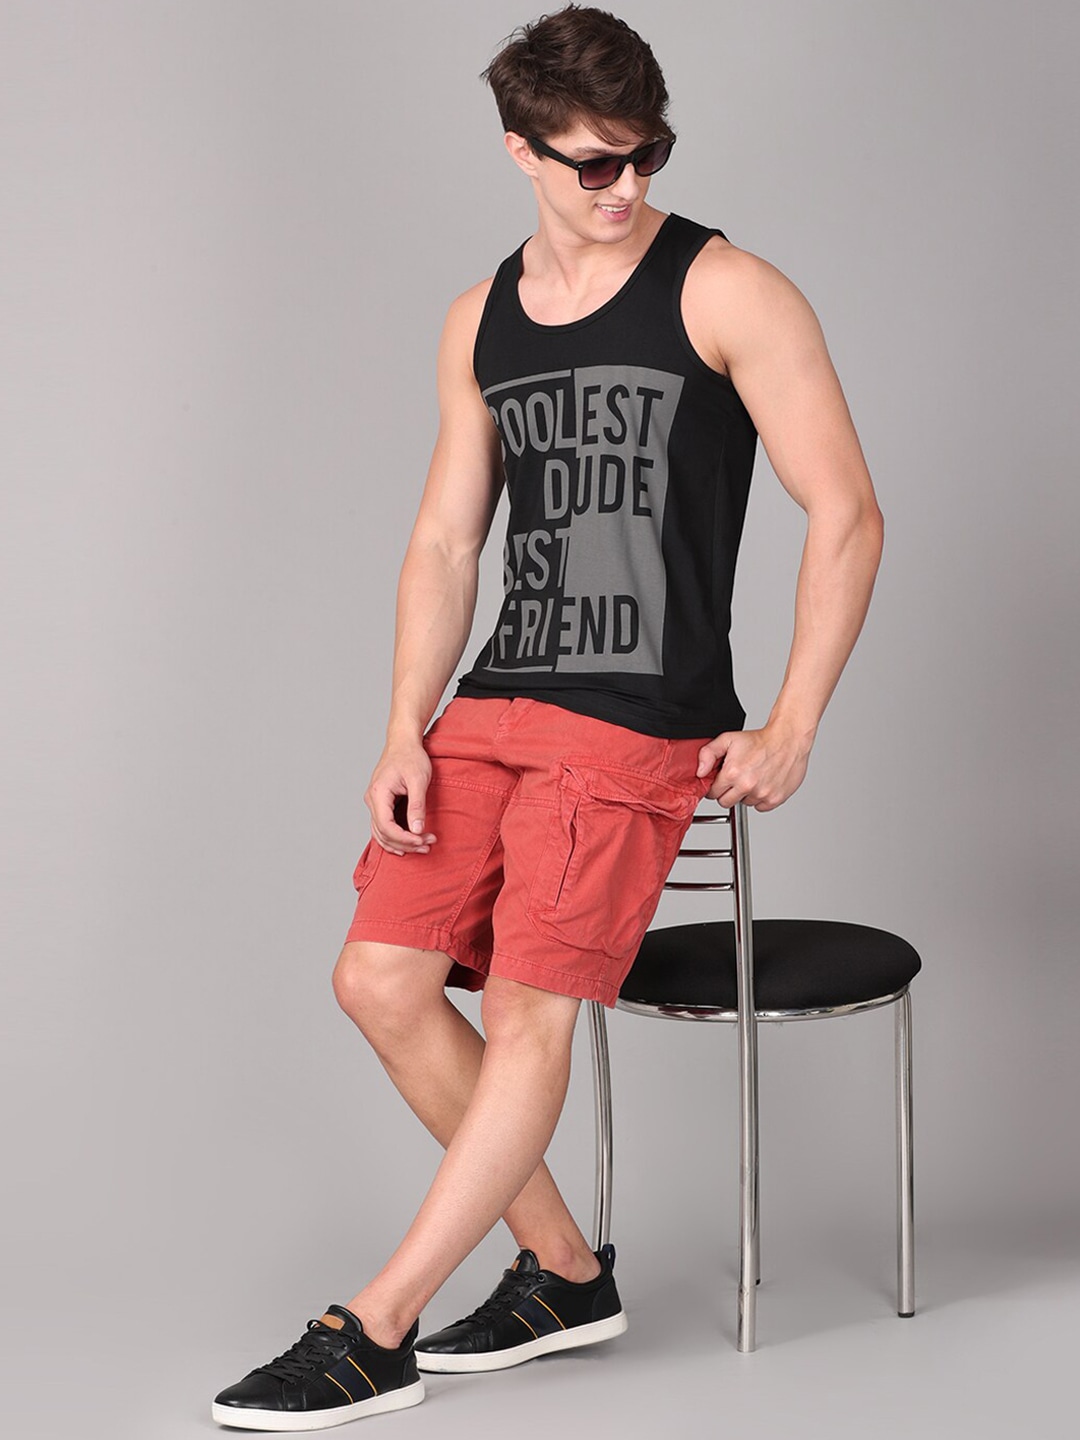 Clothing Innerwear Vests | IMYOUNG Men Black & Charcoal Typography Printed Innerwear Vests - XP00627